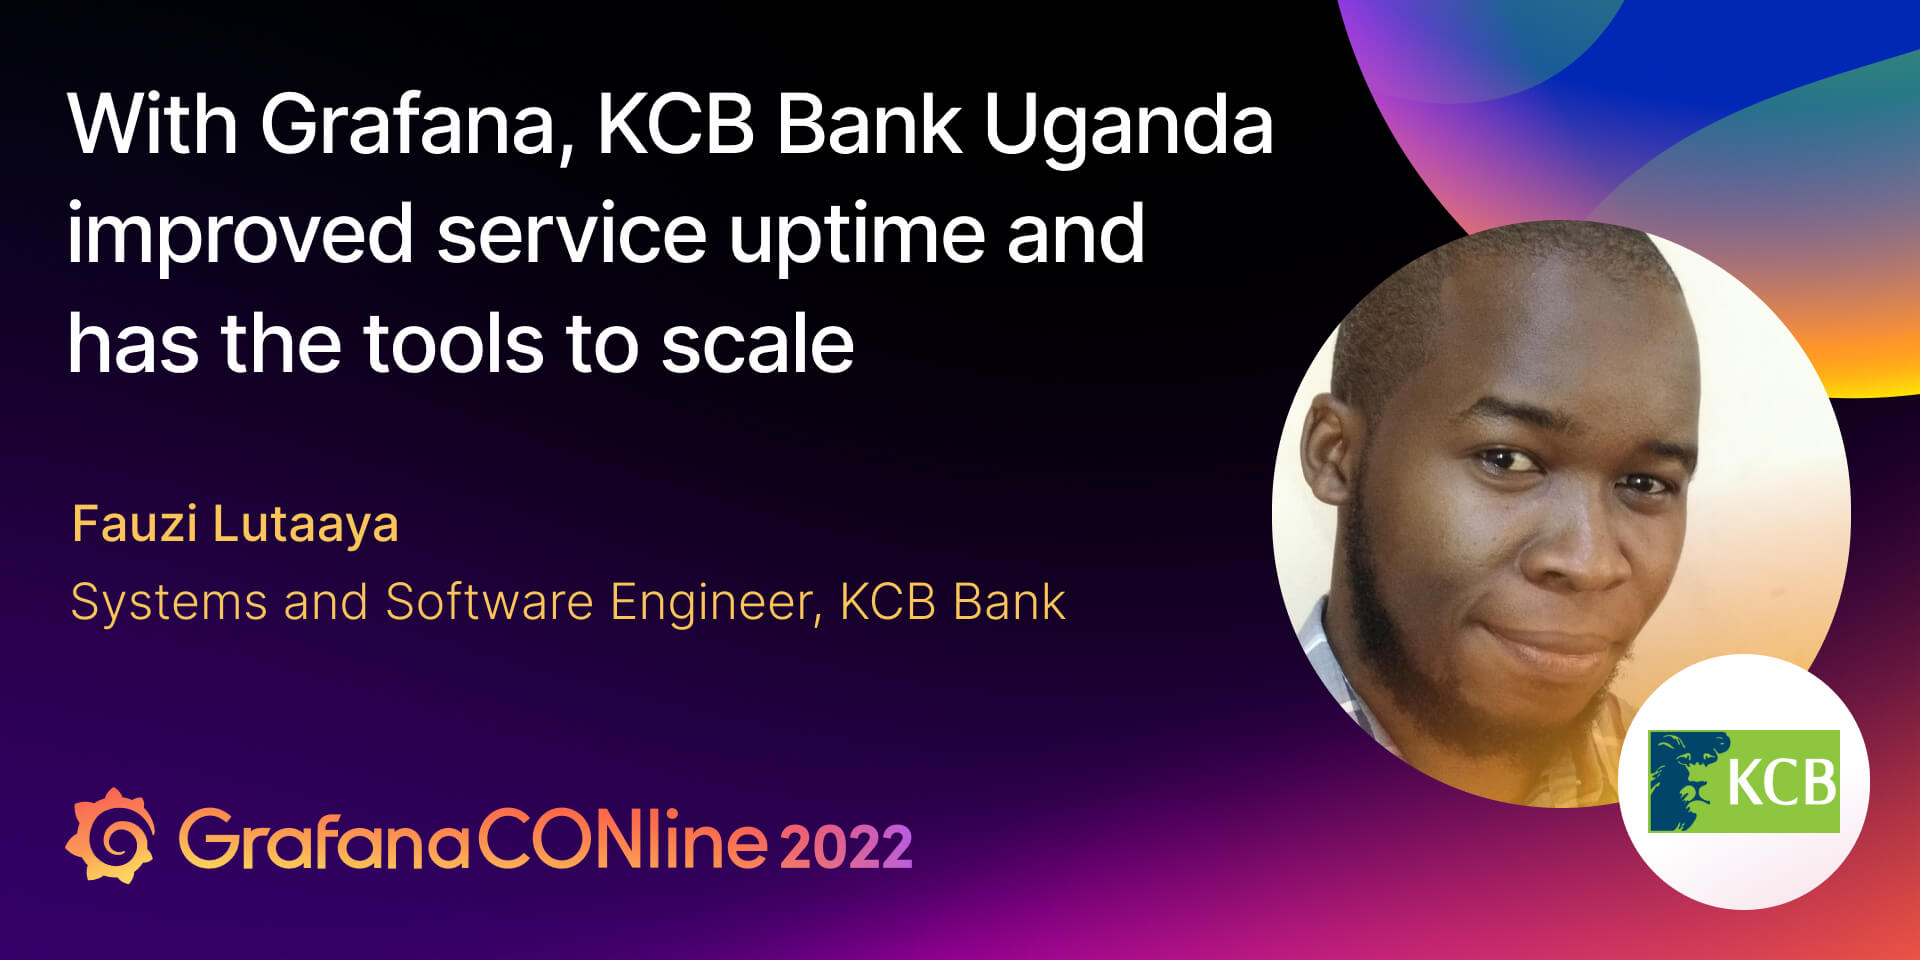 With Grafana, KCB Bank Uganda improved service uptime and has the tools to scale